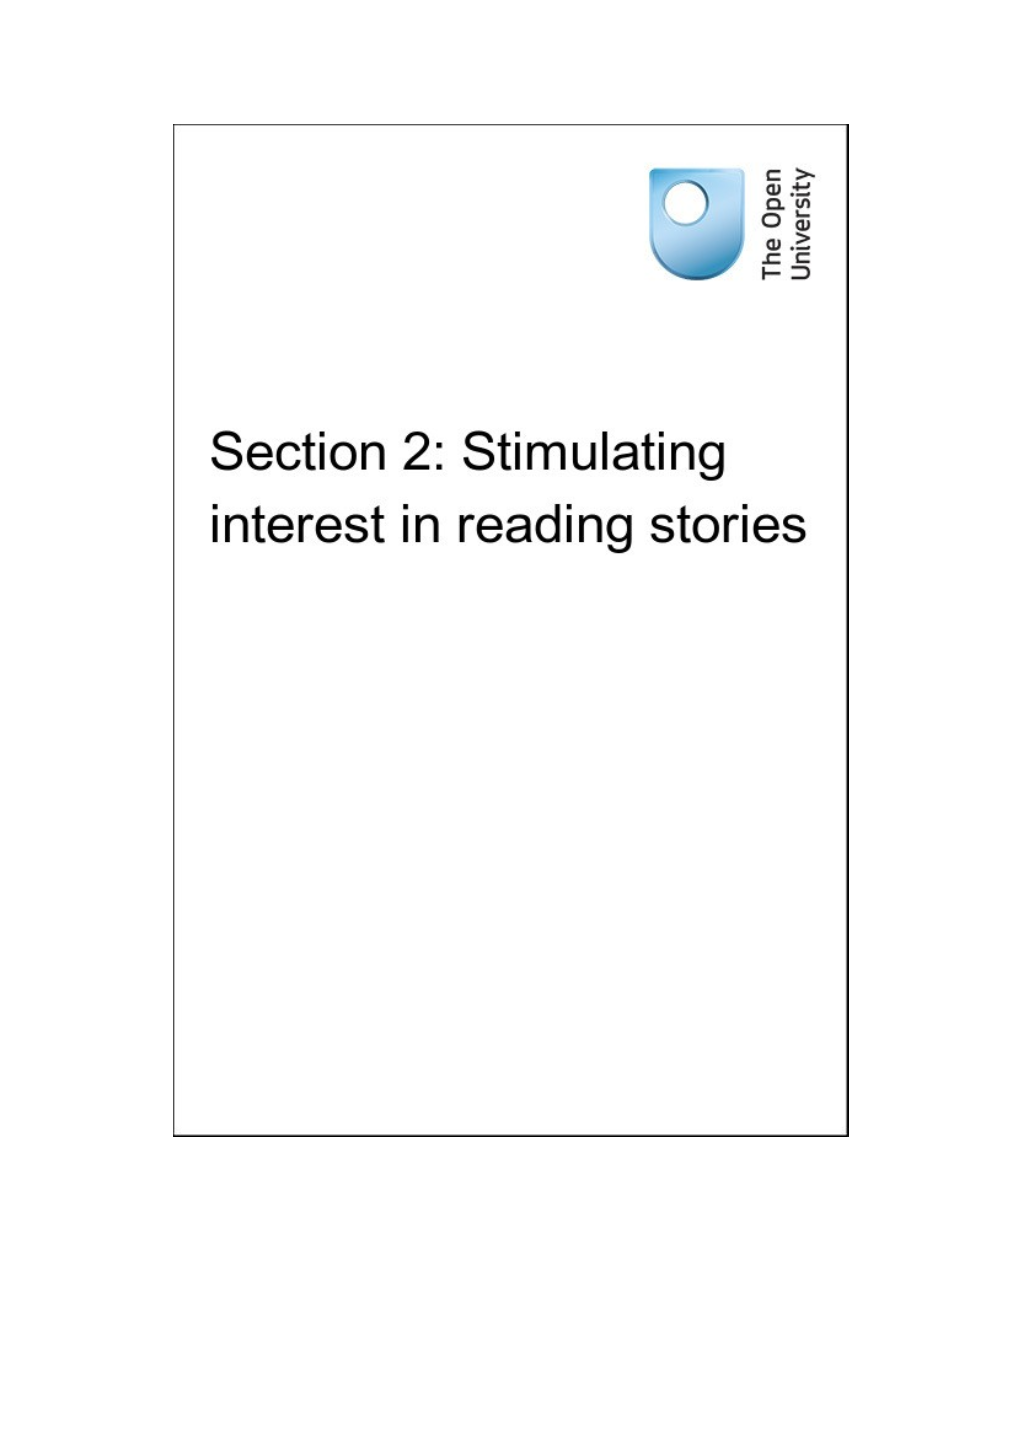 Section 2: Stimulating Interest in Reading Stories